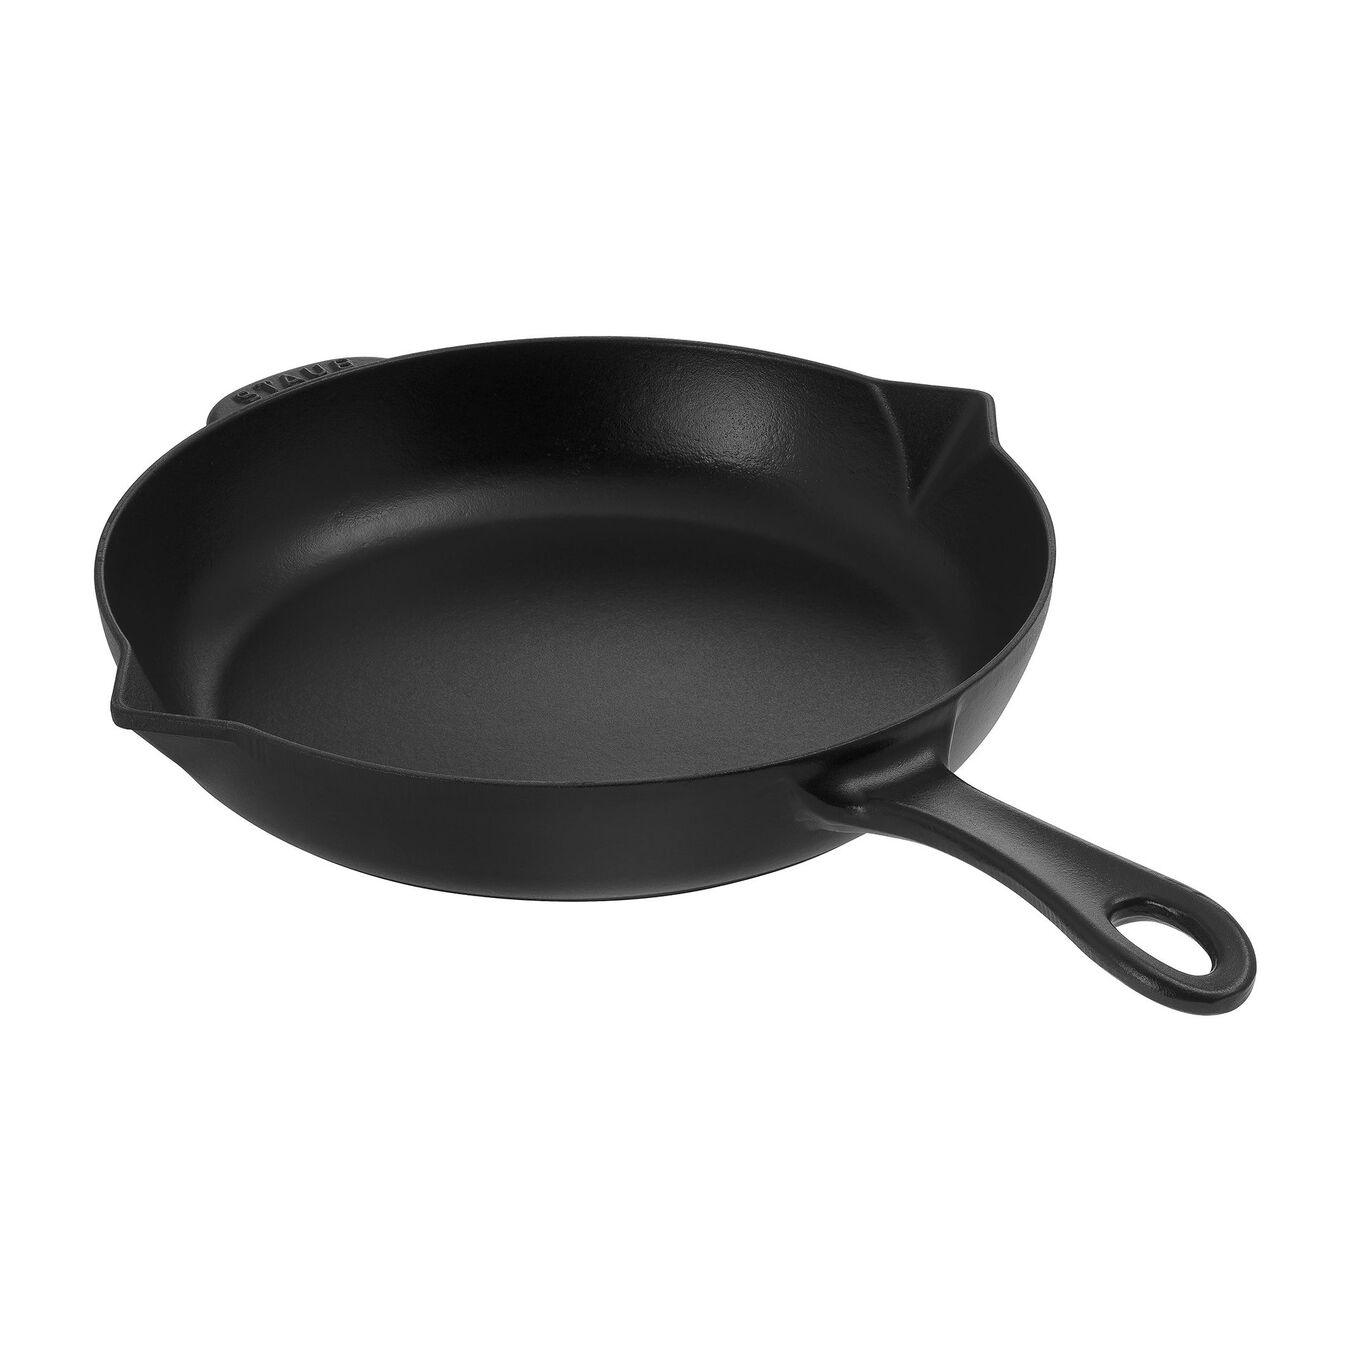 FINEX Cast Iron Cookware Co. on X: Just Dropped: FINEX 14” Double Handle  Skillet & Lid⁠.⁠ The most versatile pan you'll ever own – now in our  largest and most inspiring size.⁠